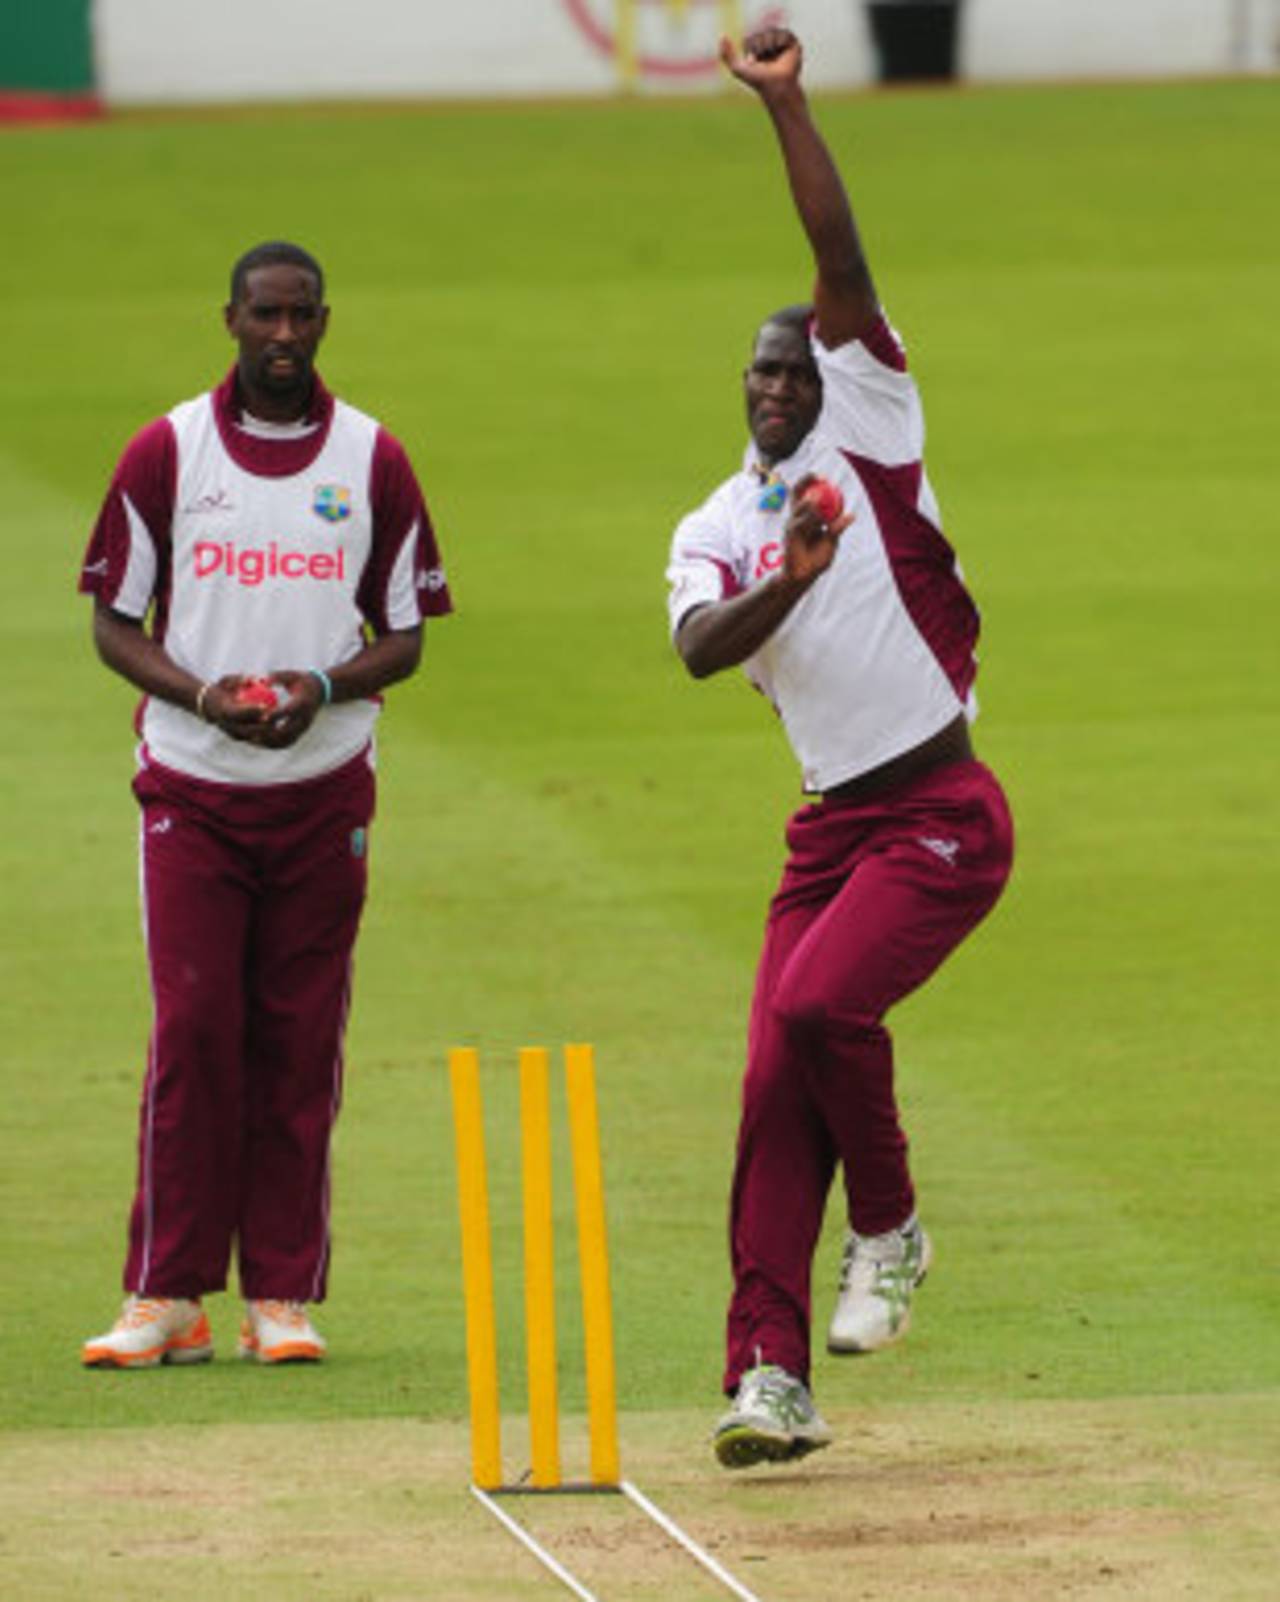 Darren Sammy goes through his paces ahead of the first Test, Lord's, May 16, 2012